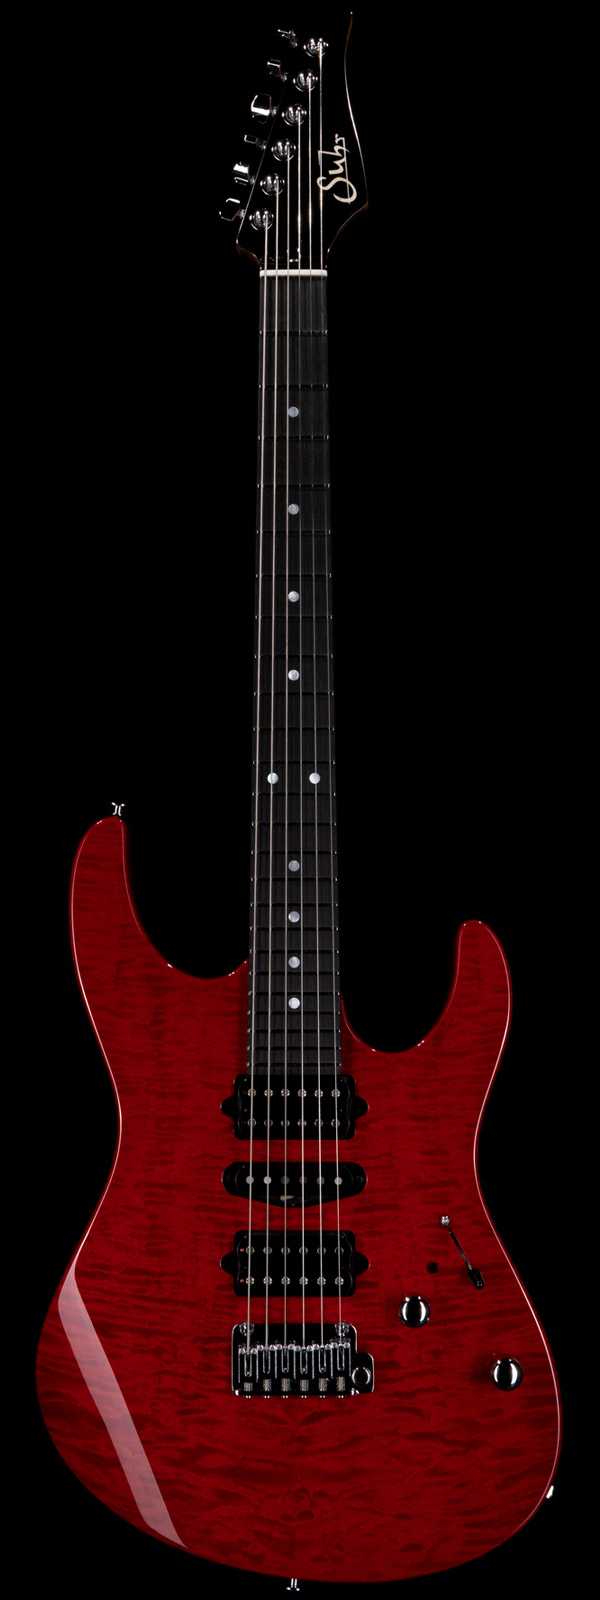 Suhr Custom Modern Quilt Top Roasted Flame Maple Neck Trans Red